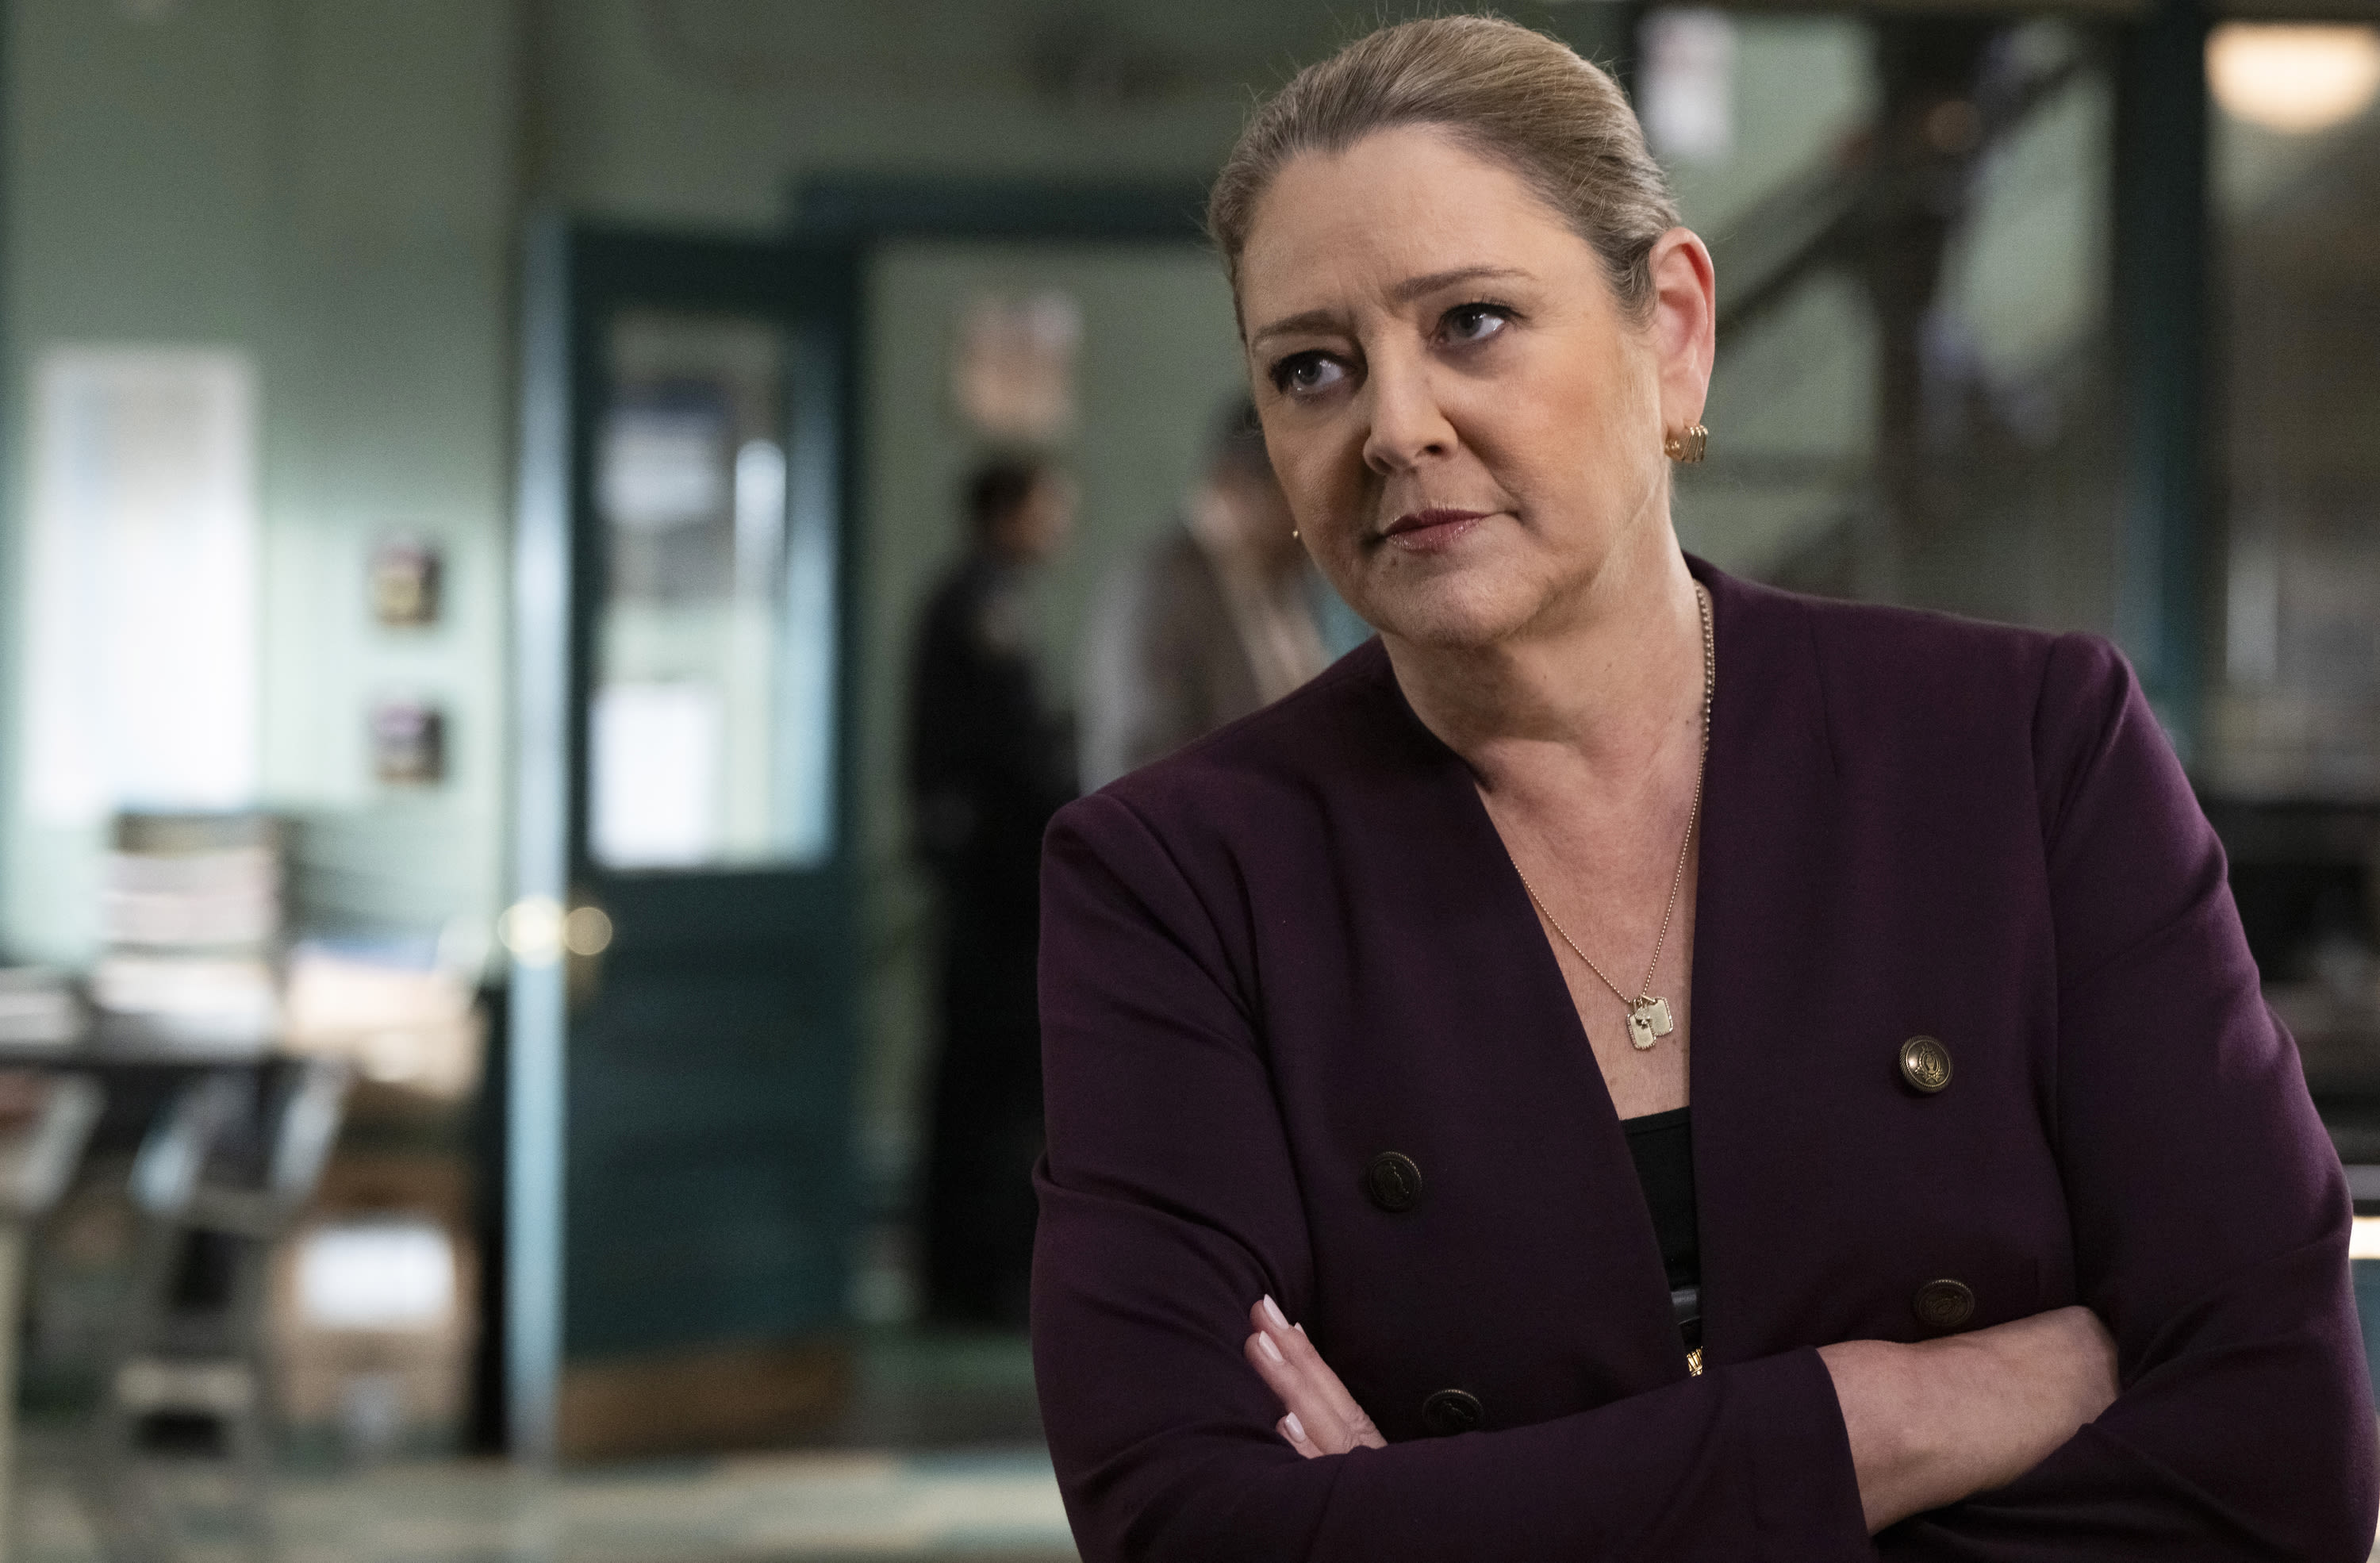 ‘Law & Order’ Season 23 Finale Does Not Address Camryn Manheim’s Exit